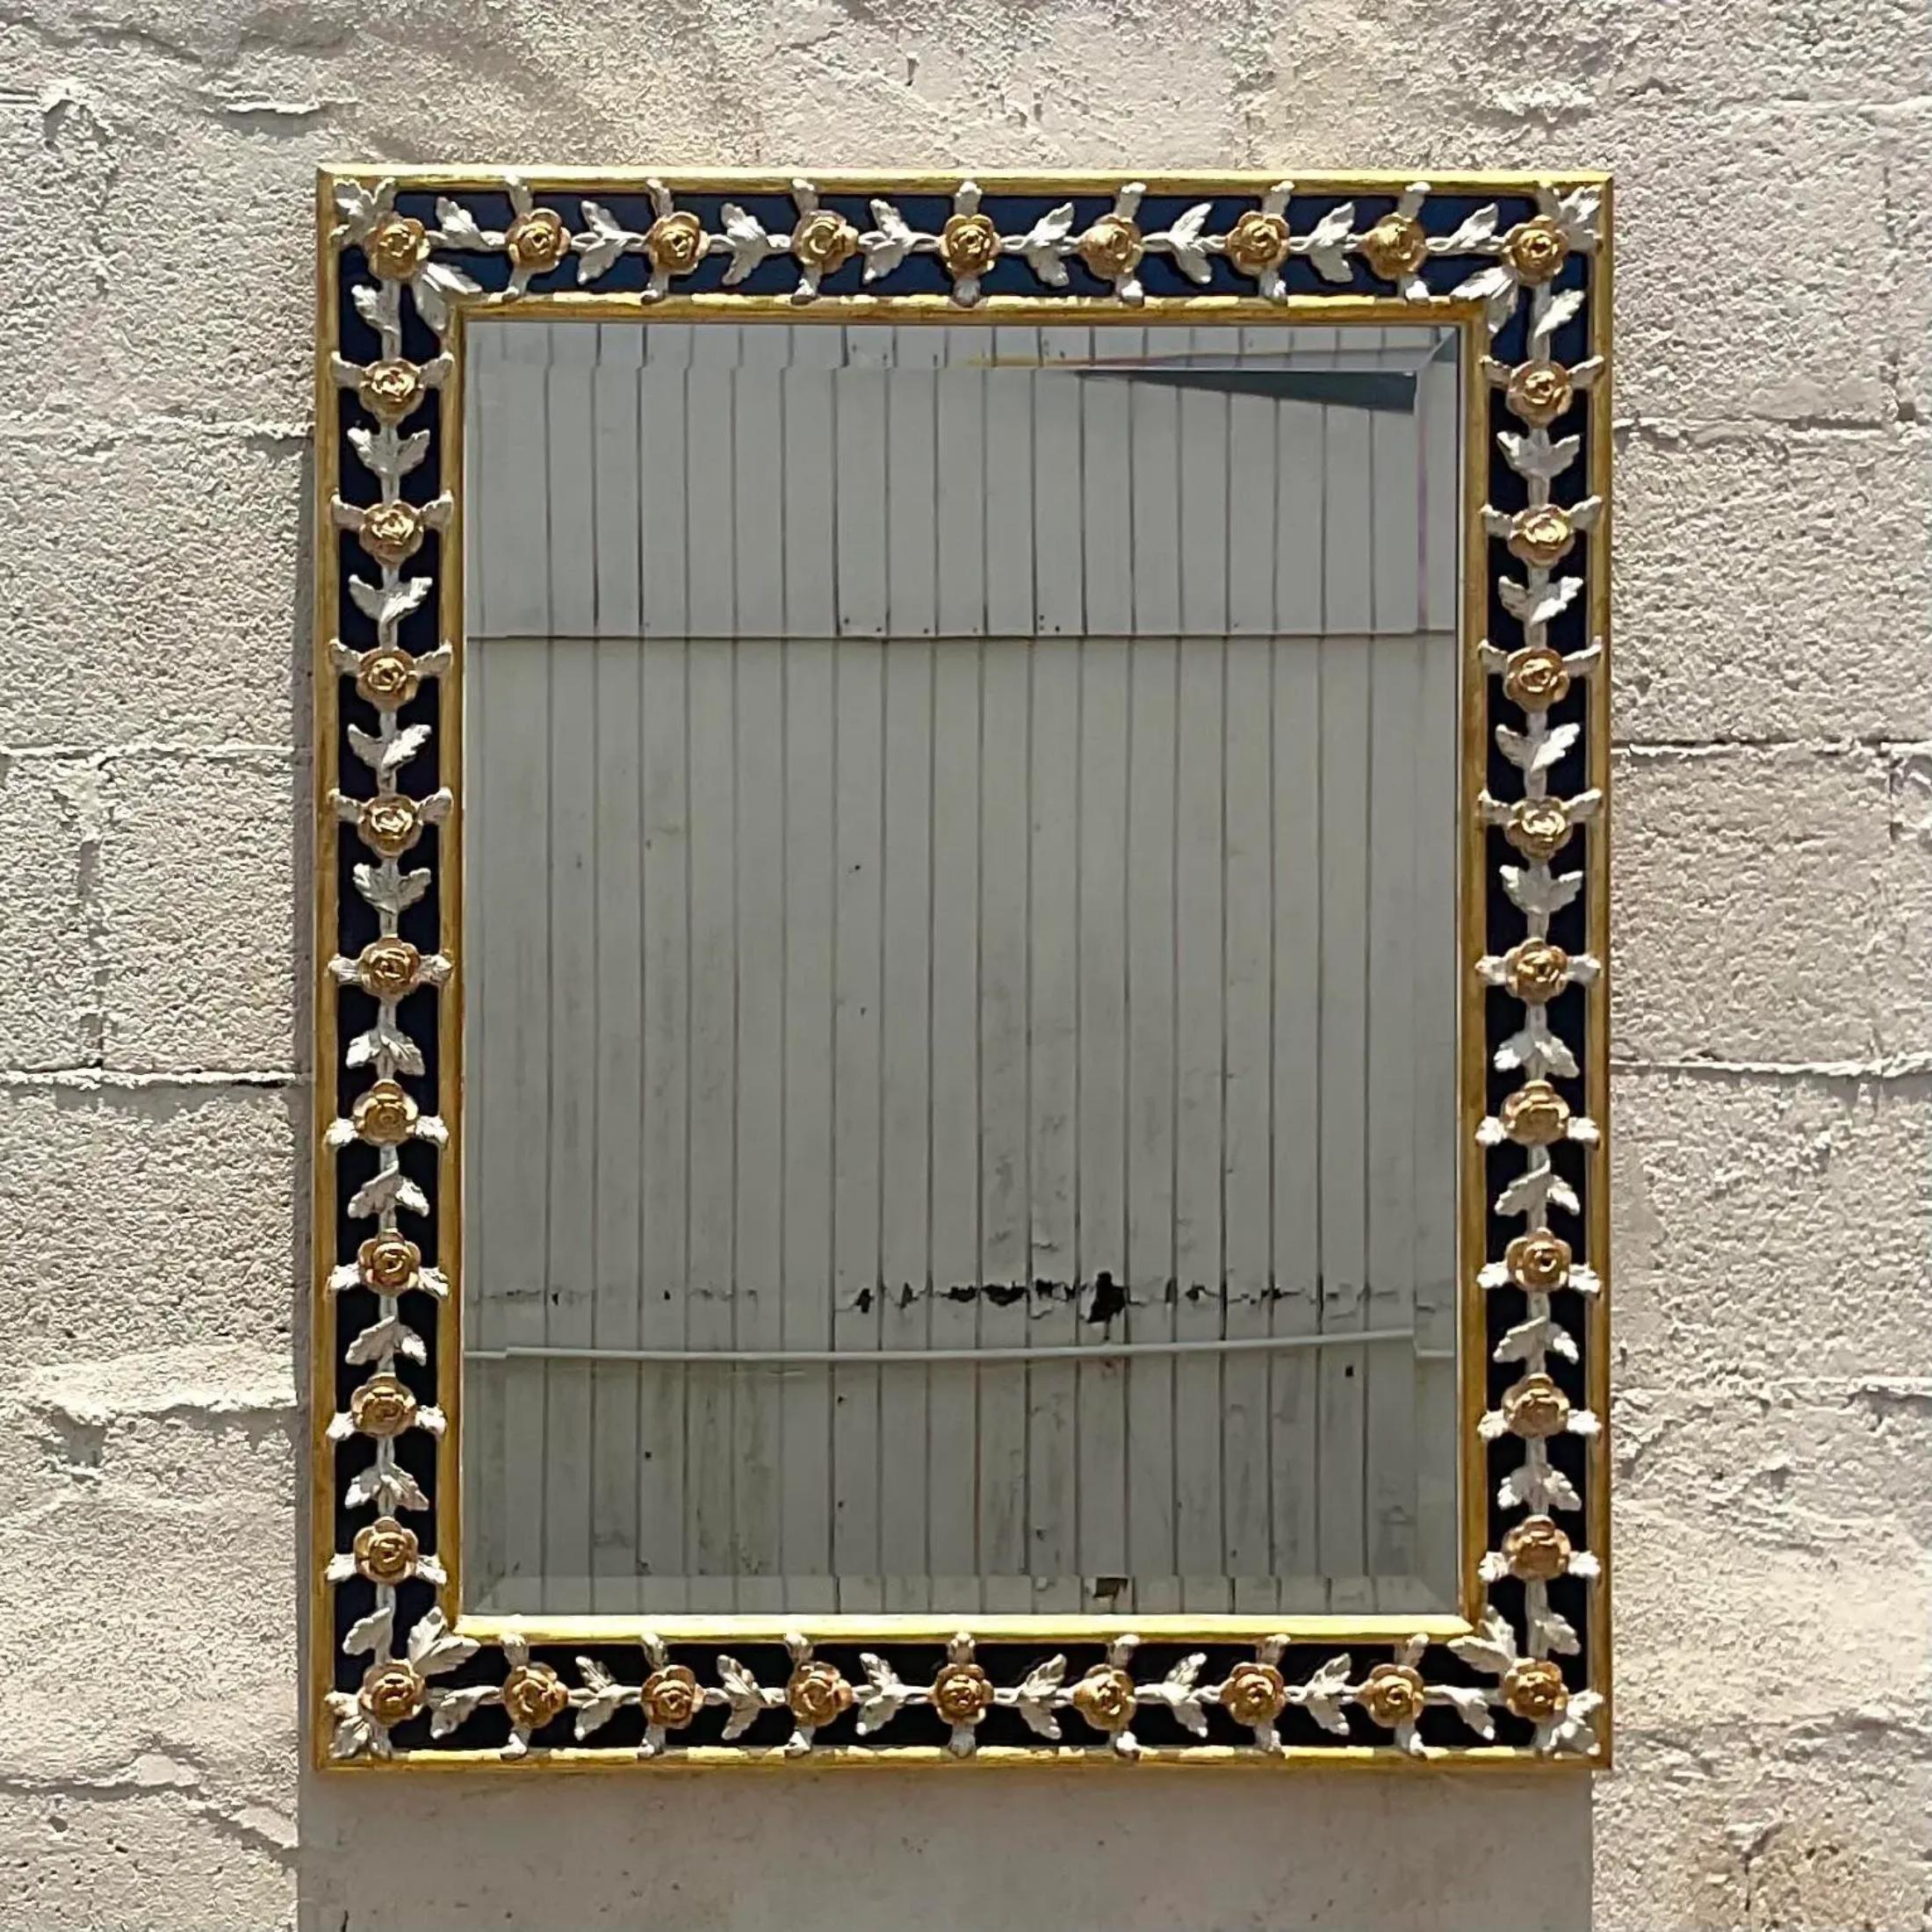 A fantastic vintage Regency wall mirror. Made by the coveted Giovanni Chellini group. Beautiful harp d carved detail with gilt tipping. Acquired from a Palm Beach estate